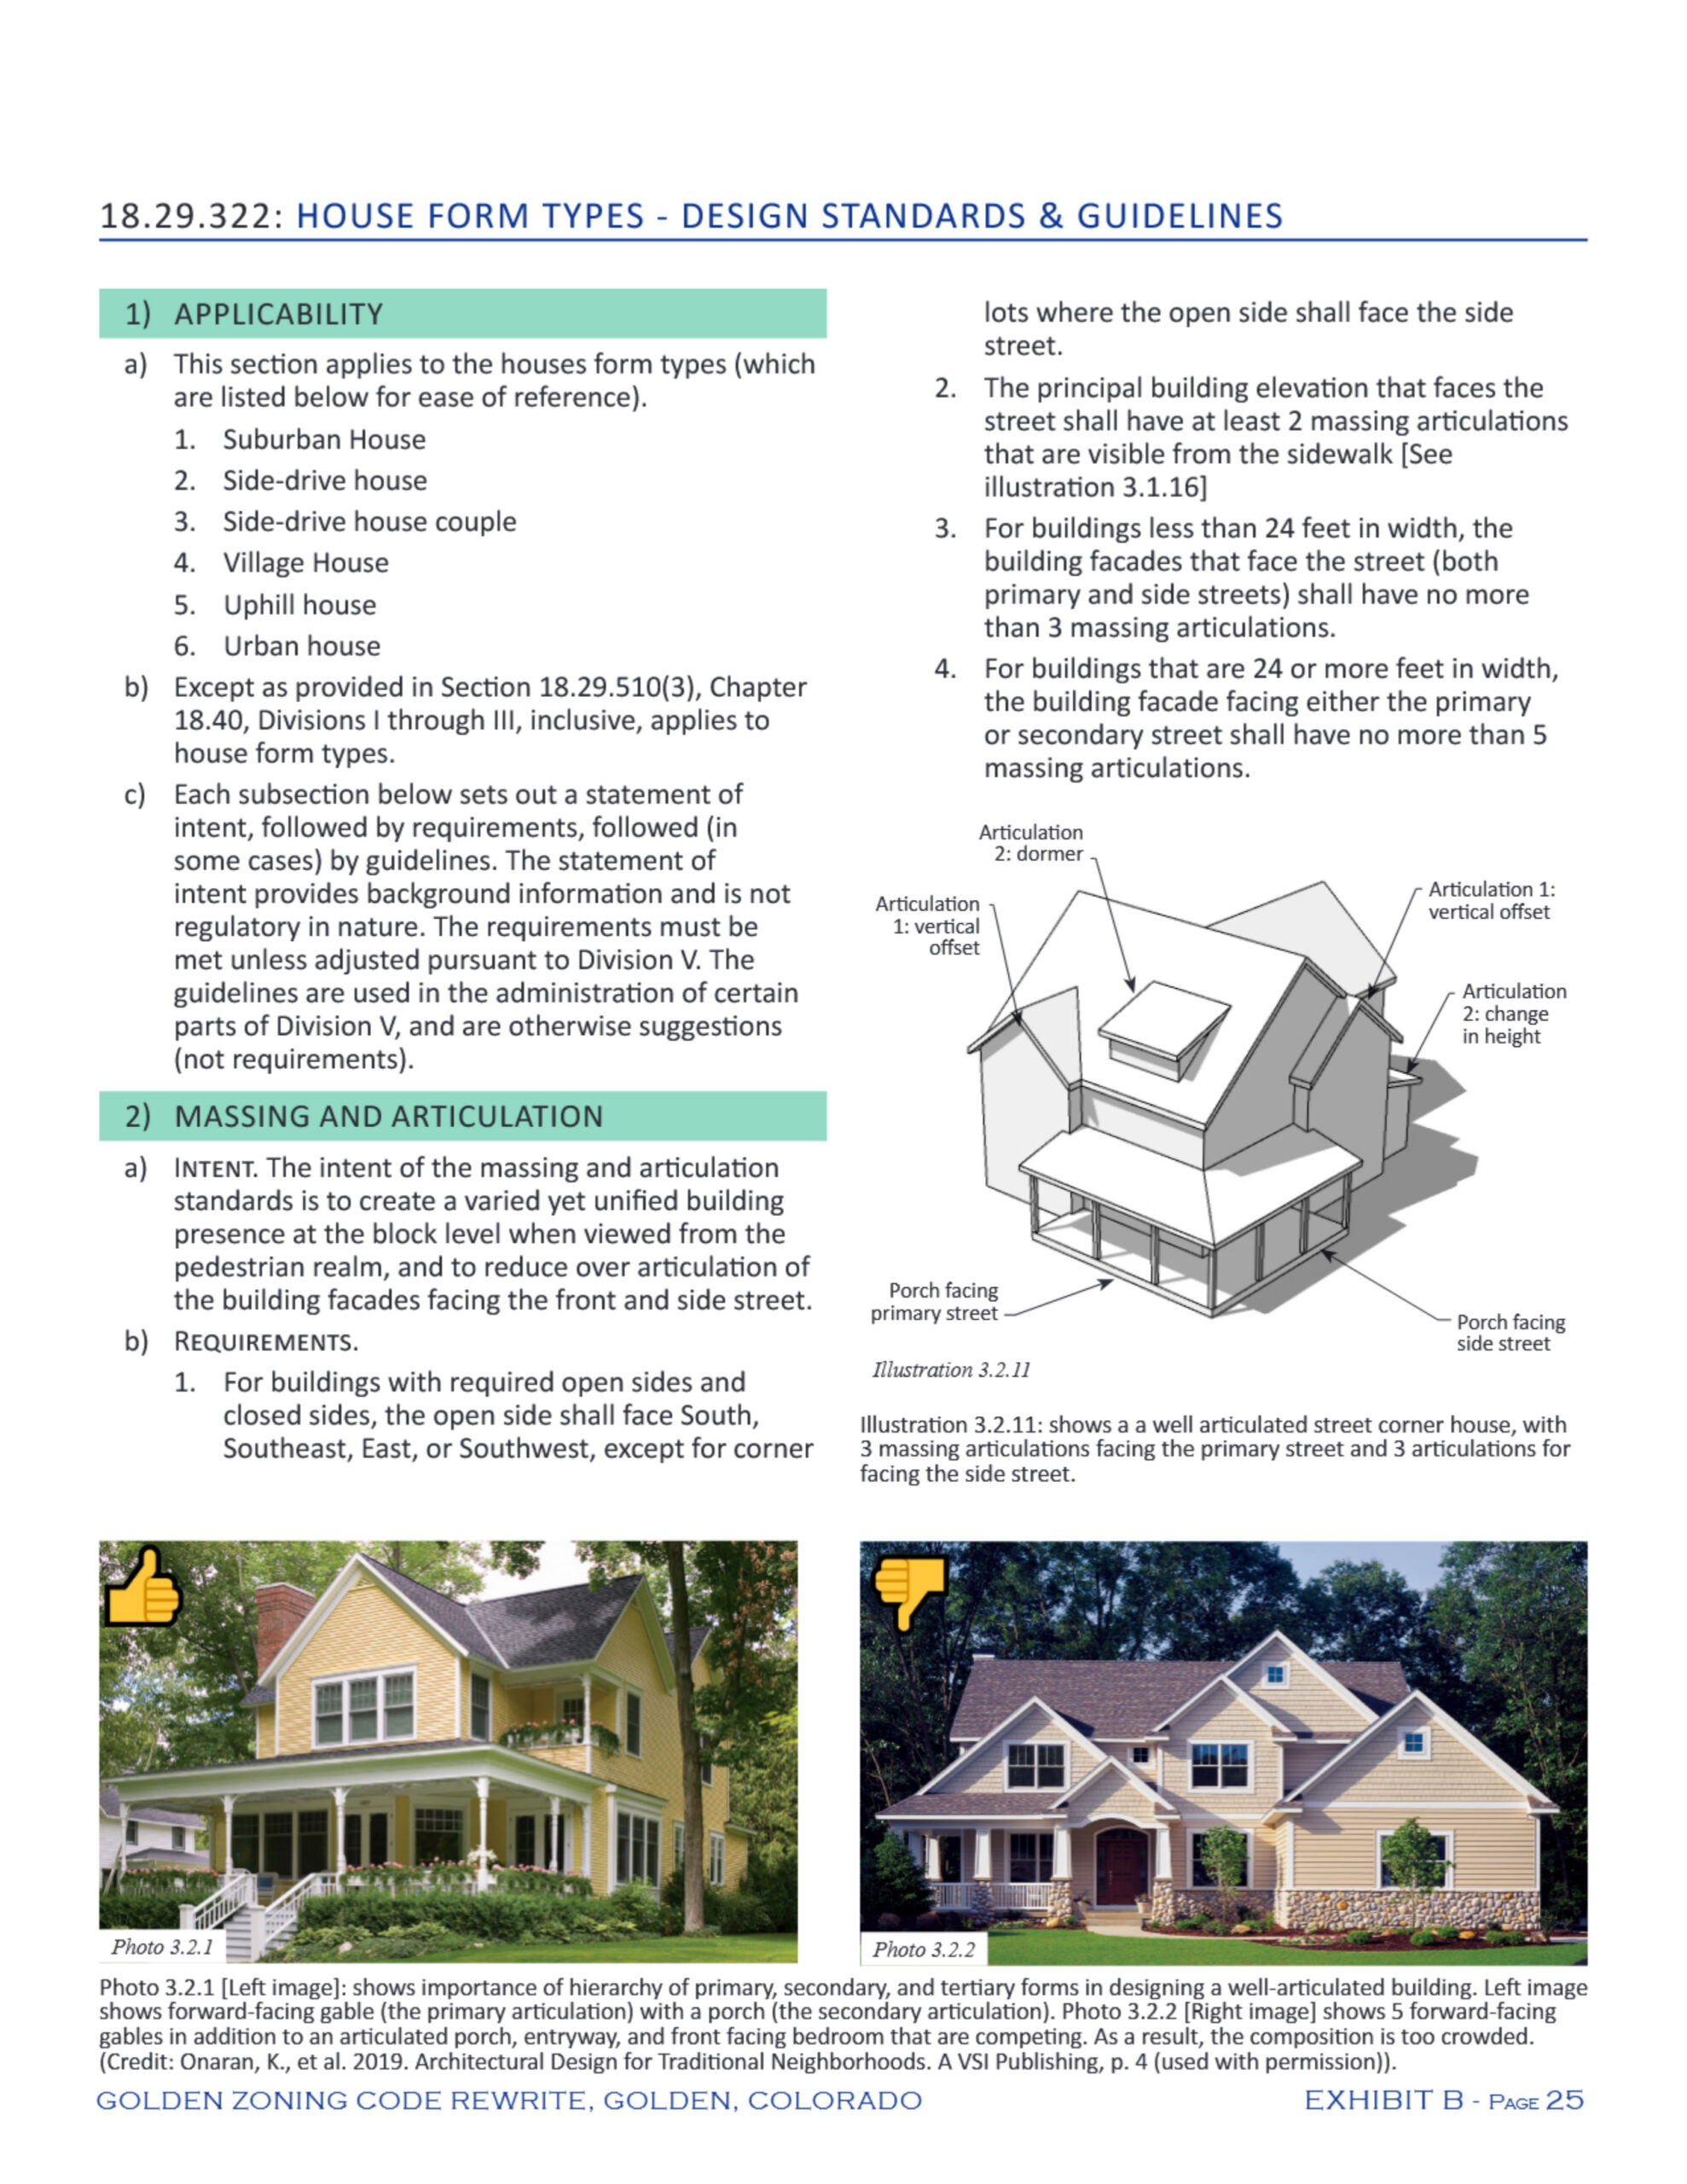 Golden Zoning Code house form types example